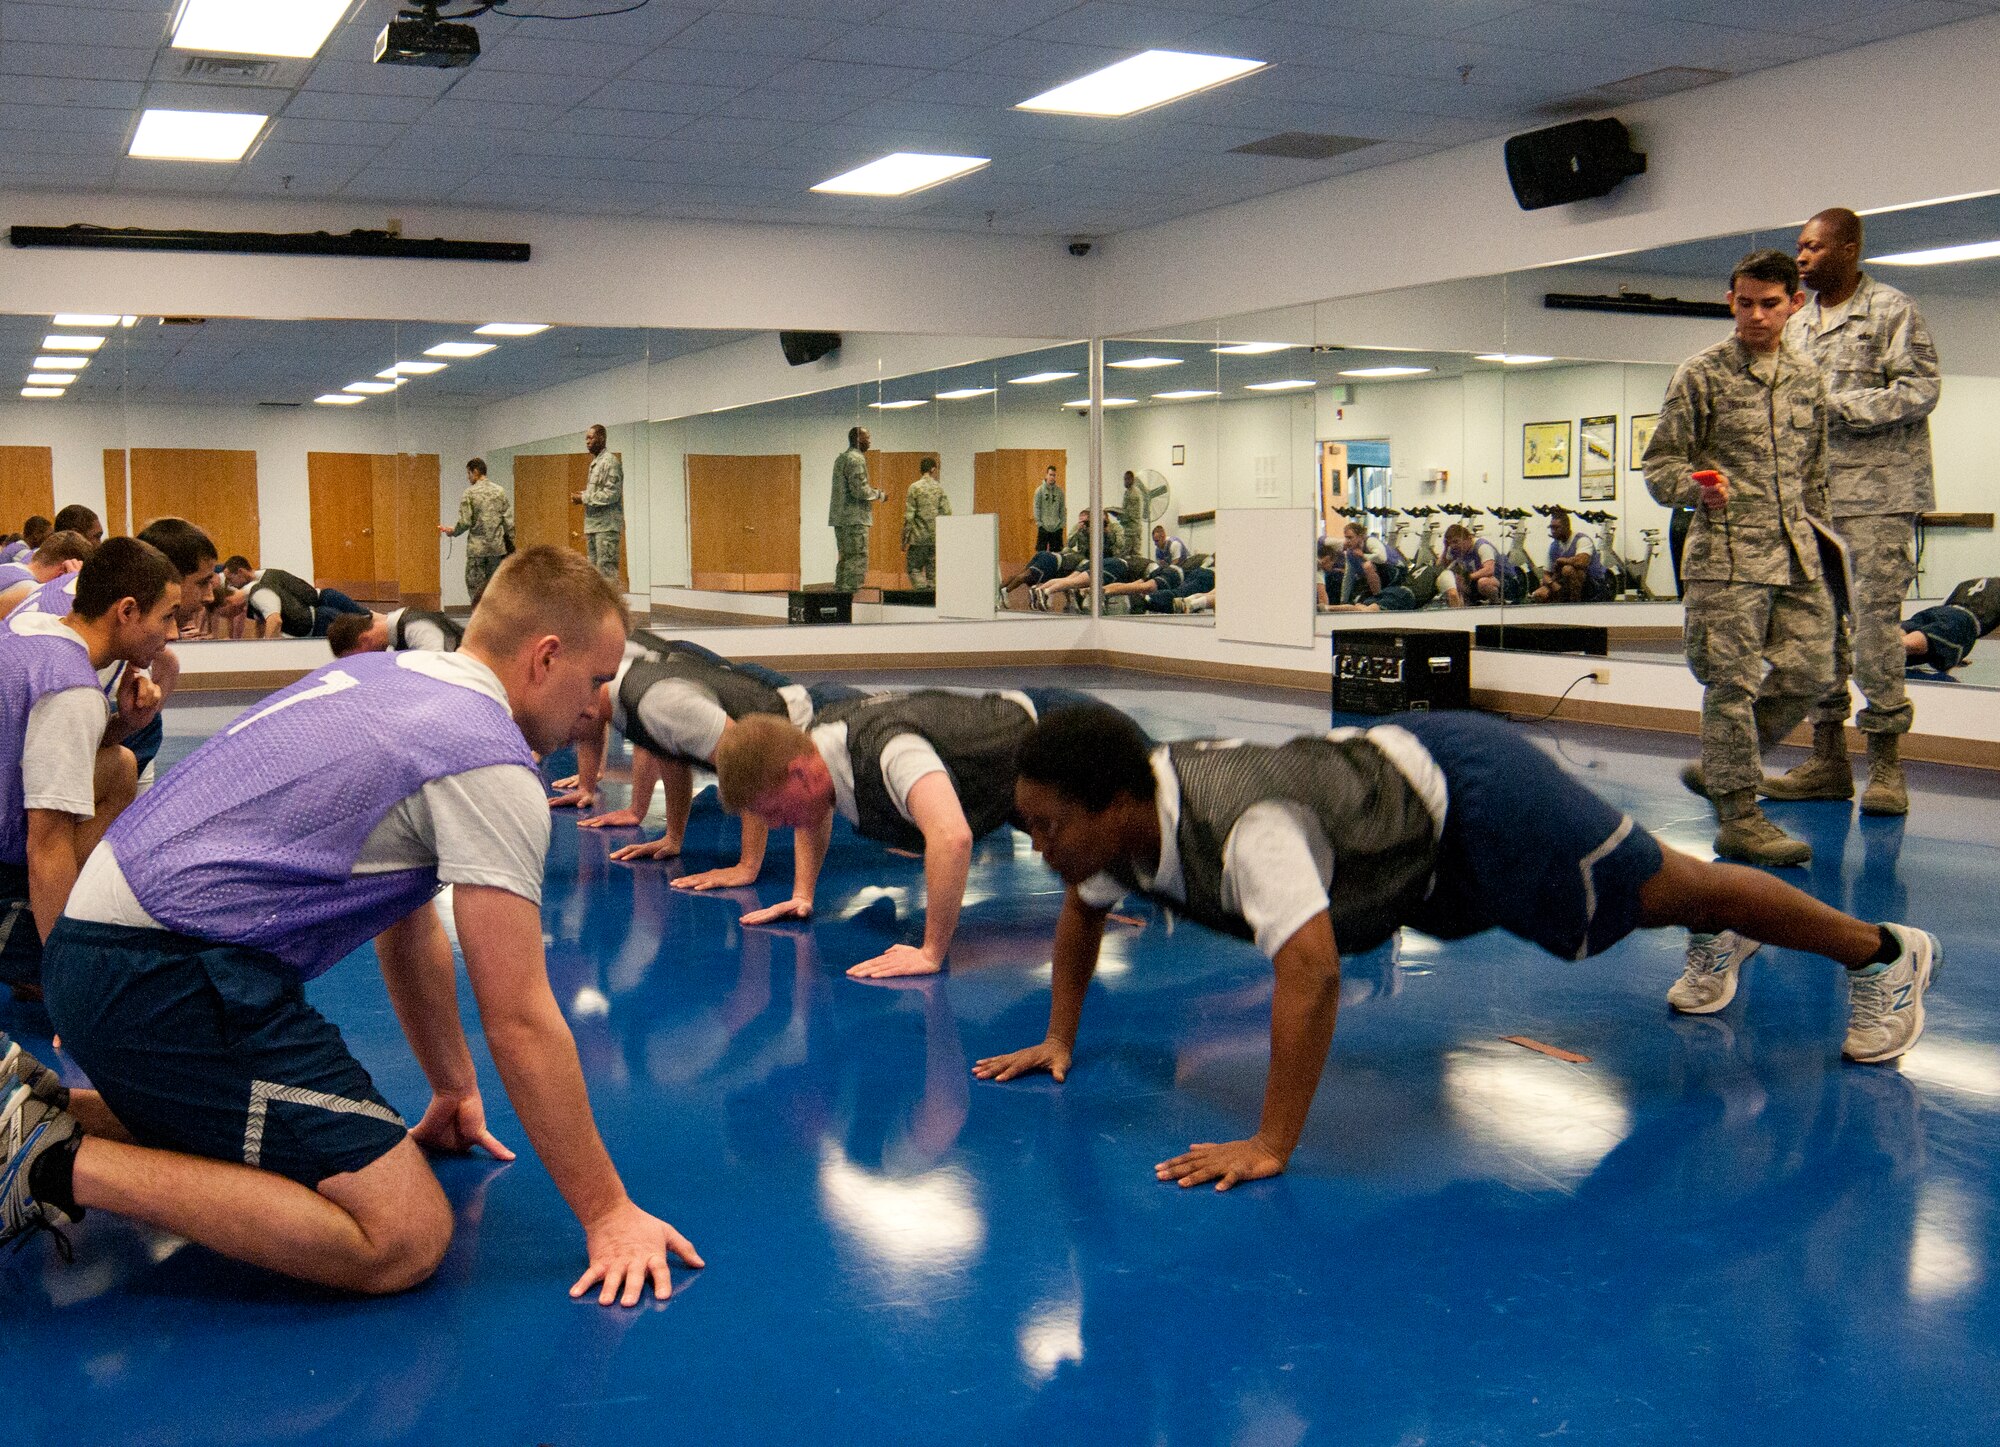 Airmen take the pushup portion of the Air Force fitness assessment, which entails doing as many pushups as possible within one minute, March 4, 2014, in the Indepence Hall Fitness Center on F.E. Warren Air Force Base, Wyo. Test takers count the number of pushups a wingman performs correctly, and then the two switch and the other Airman counts while the first counter performs pushups. The 90th Force Support Squadron Fitness Improvement Program intends to help Airmen who want to improve their fitness assessment scores, and increasing the number of pushups they can perform is one way to improve. (U.S. Air Force photo by Airman 1st Class Jason Wiese)